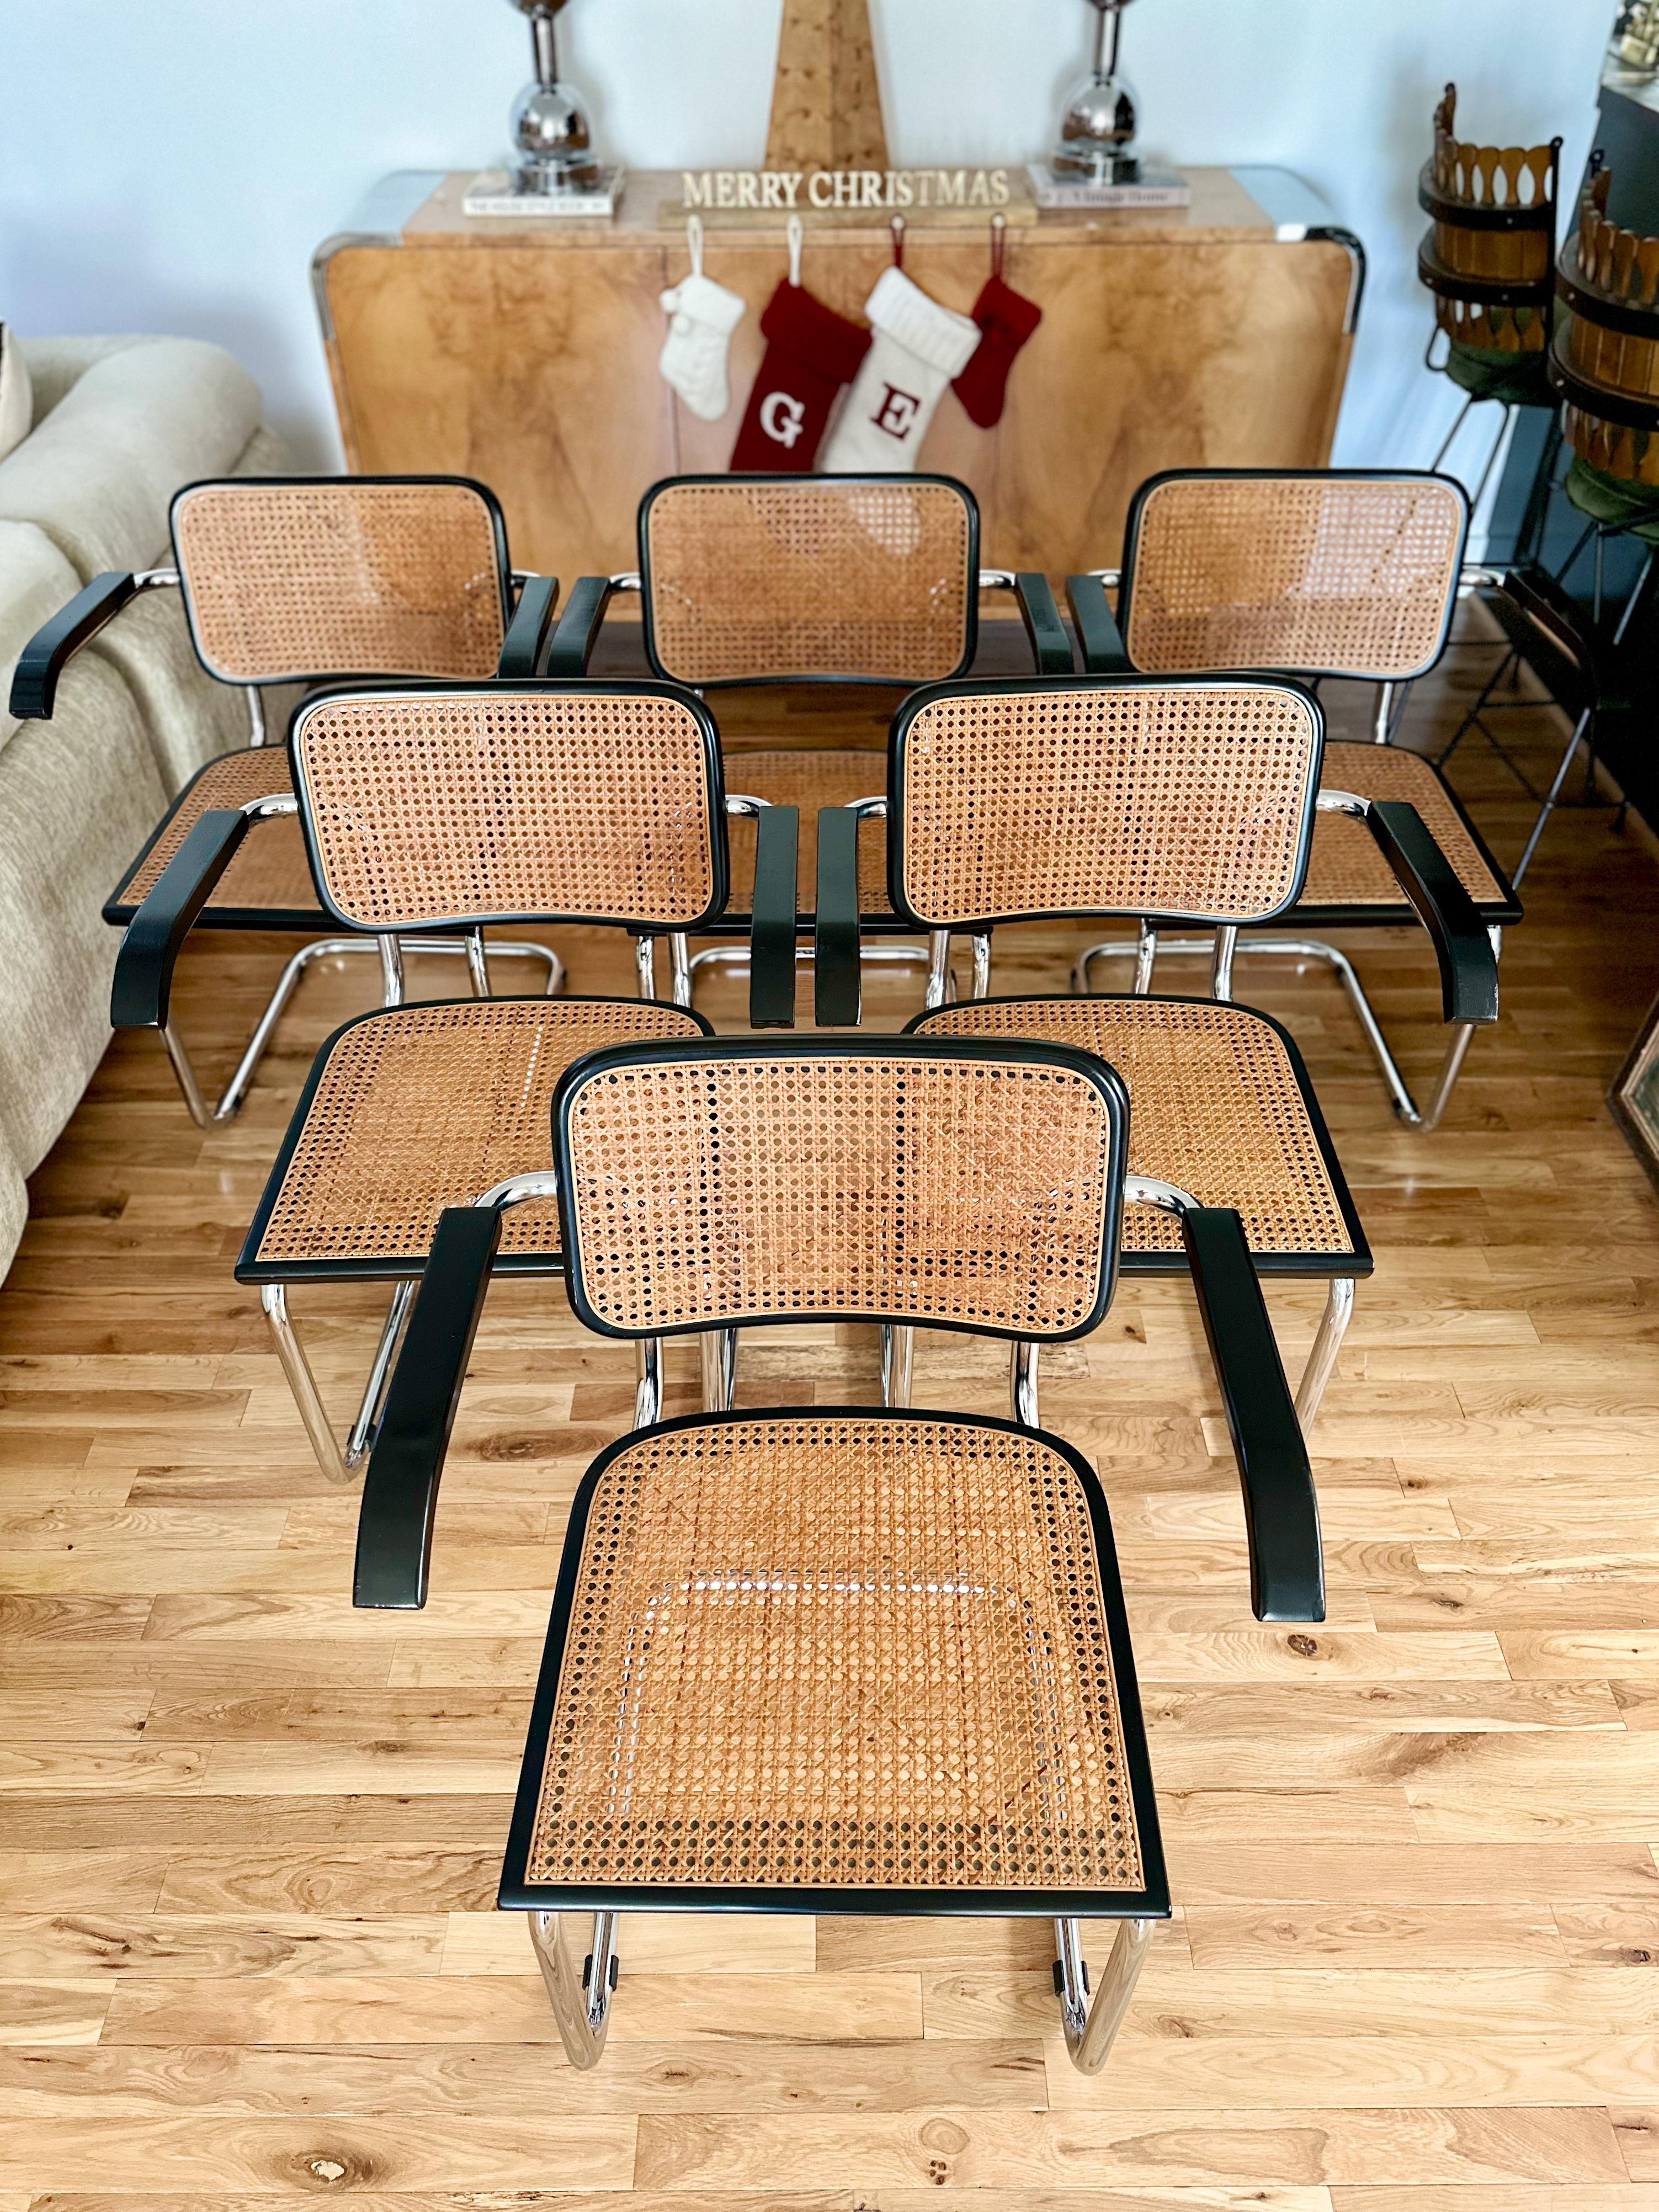 Iconic set of six vintage Italian Cesca armchairs attributed to Marcel Breuer. Designed in 1928 and still made to this day, Cesca chairs epitomize Bauhaus design and vintage sets are coveted and collectible. The black finish and armed configuration